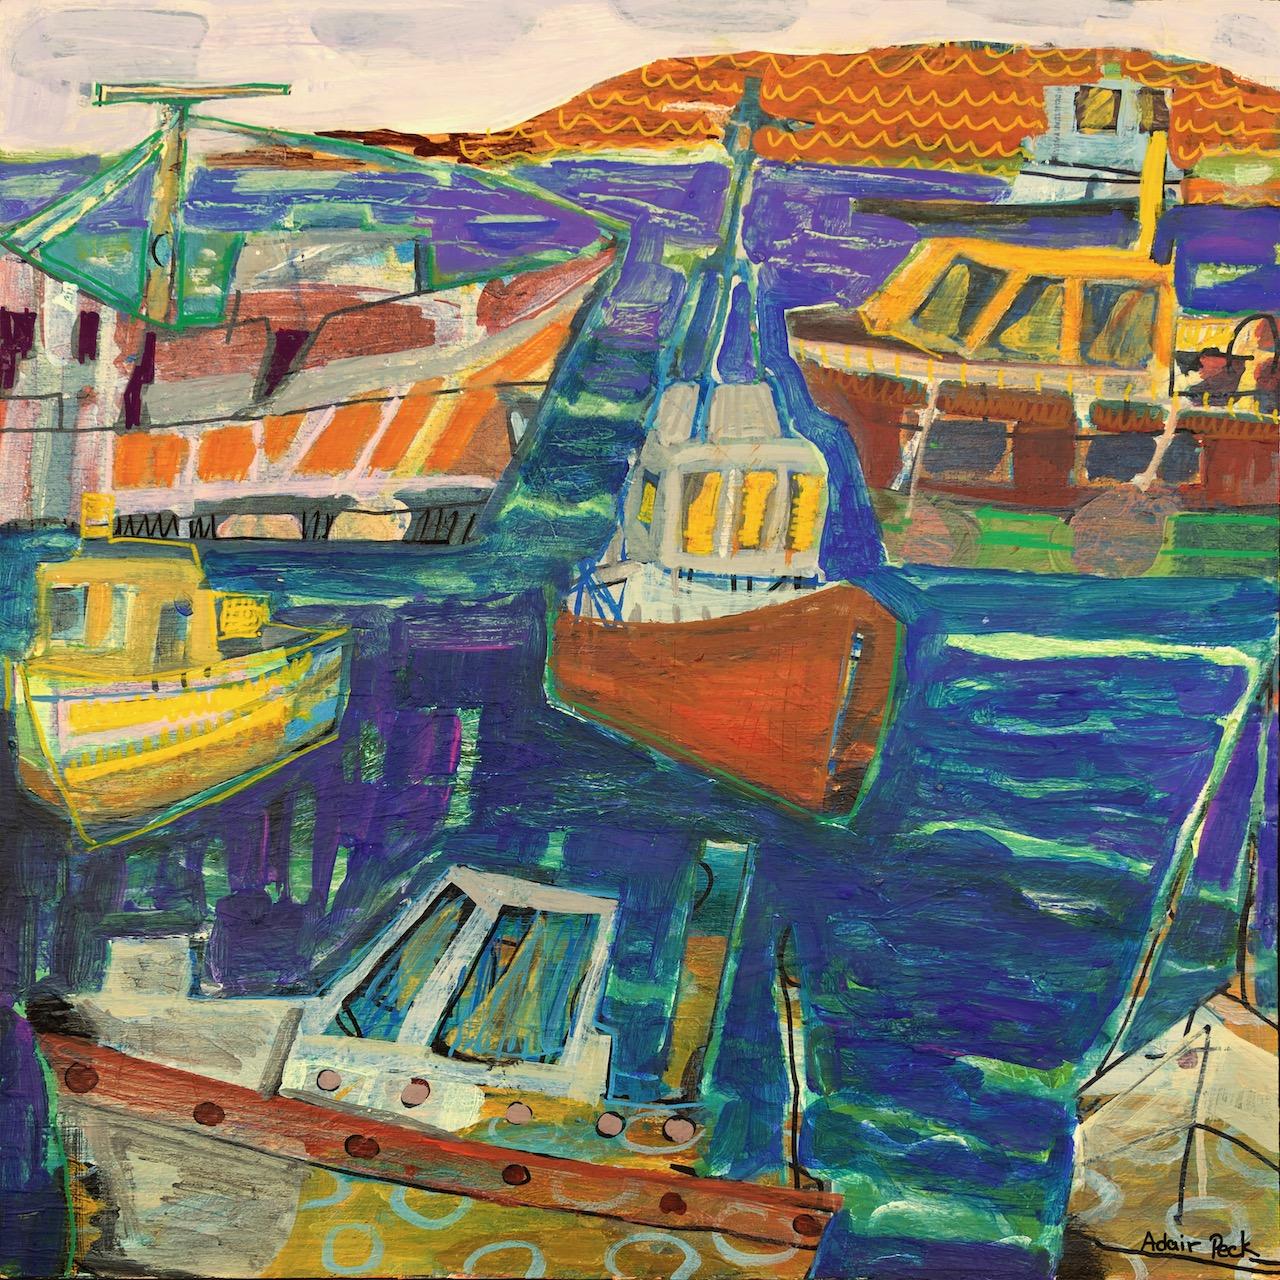 Adair Peck Landscape Painting - "End of the Day" colorful mixed media painting of fishing boats